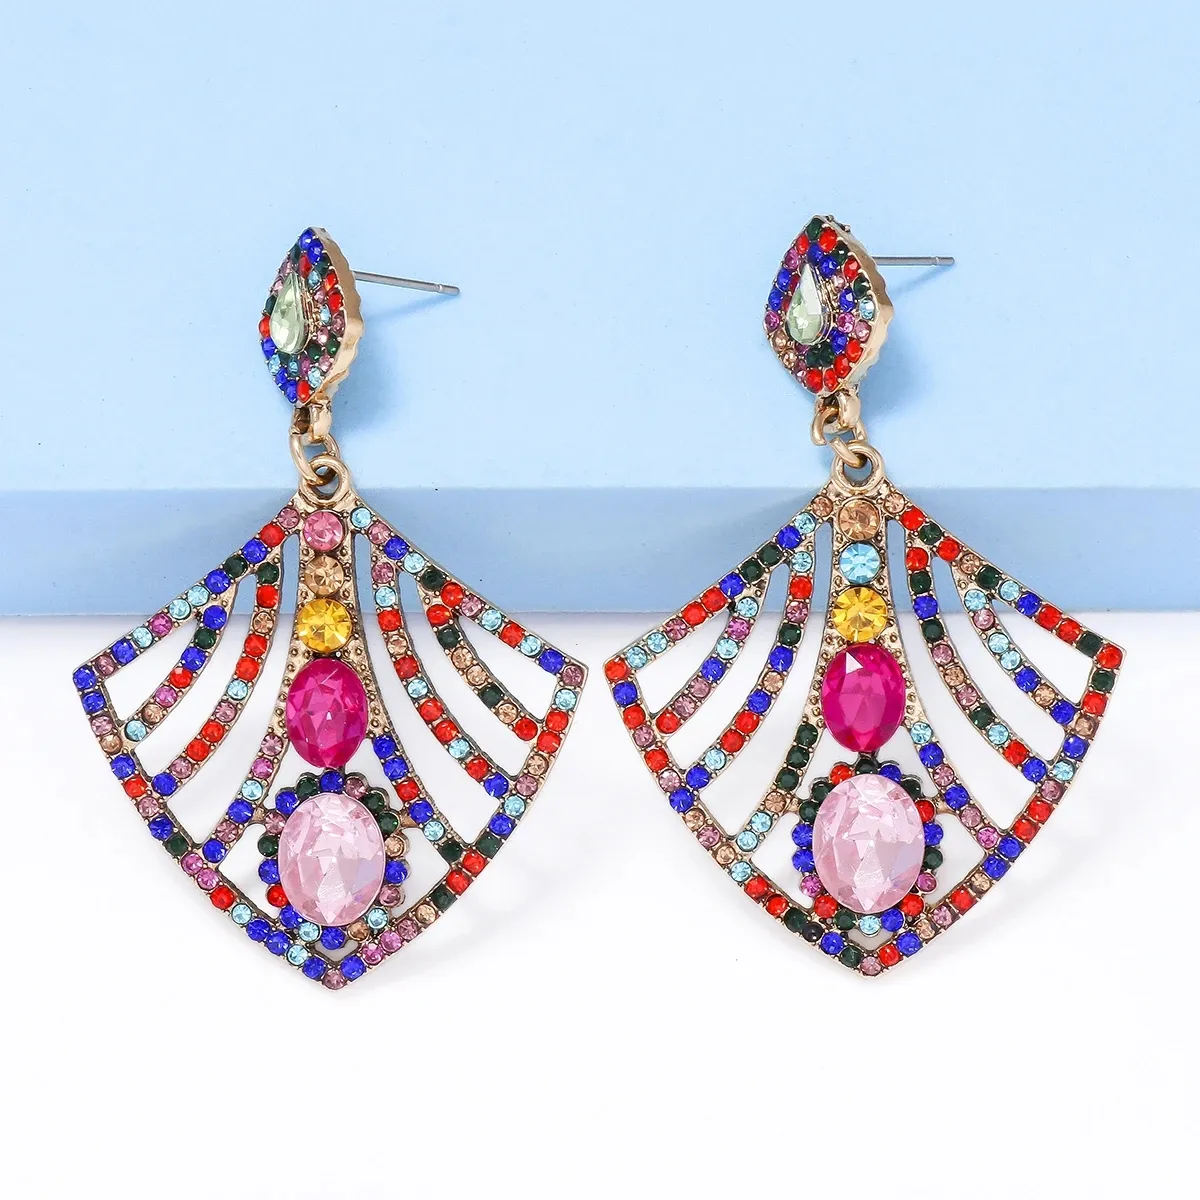 Colorful Crystal Rhinestone Earrings High-quality Banquet Party Accessories For Women Vintage Statement Indian Jewelry